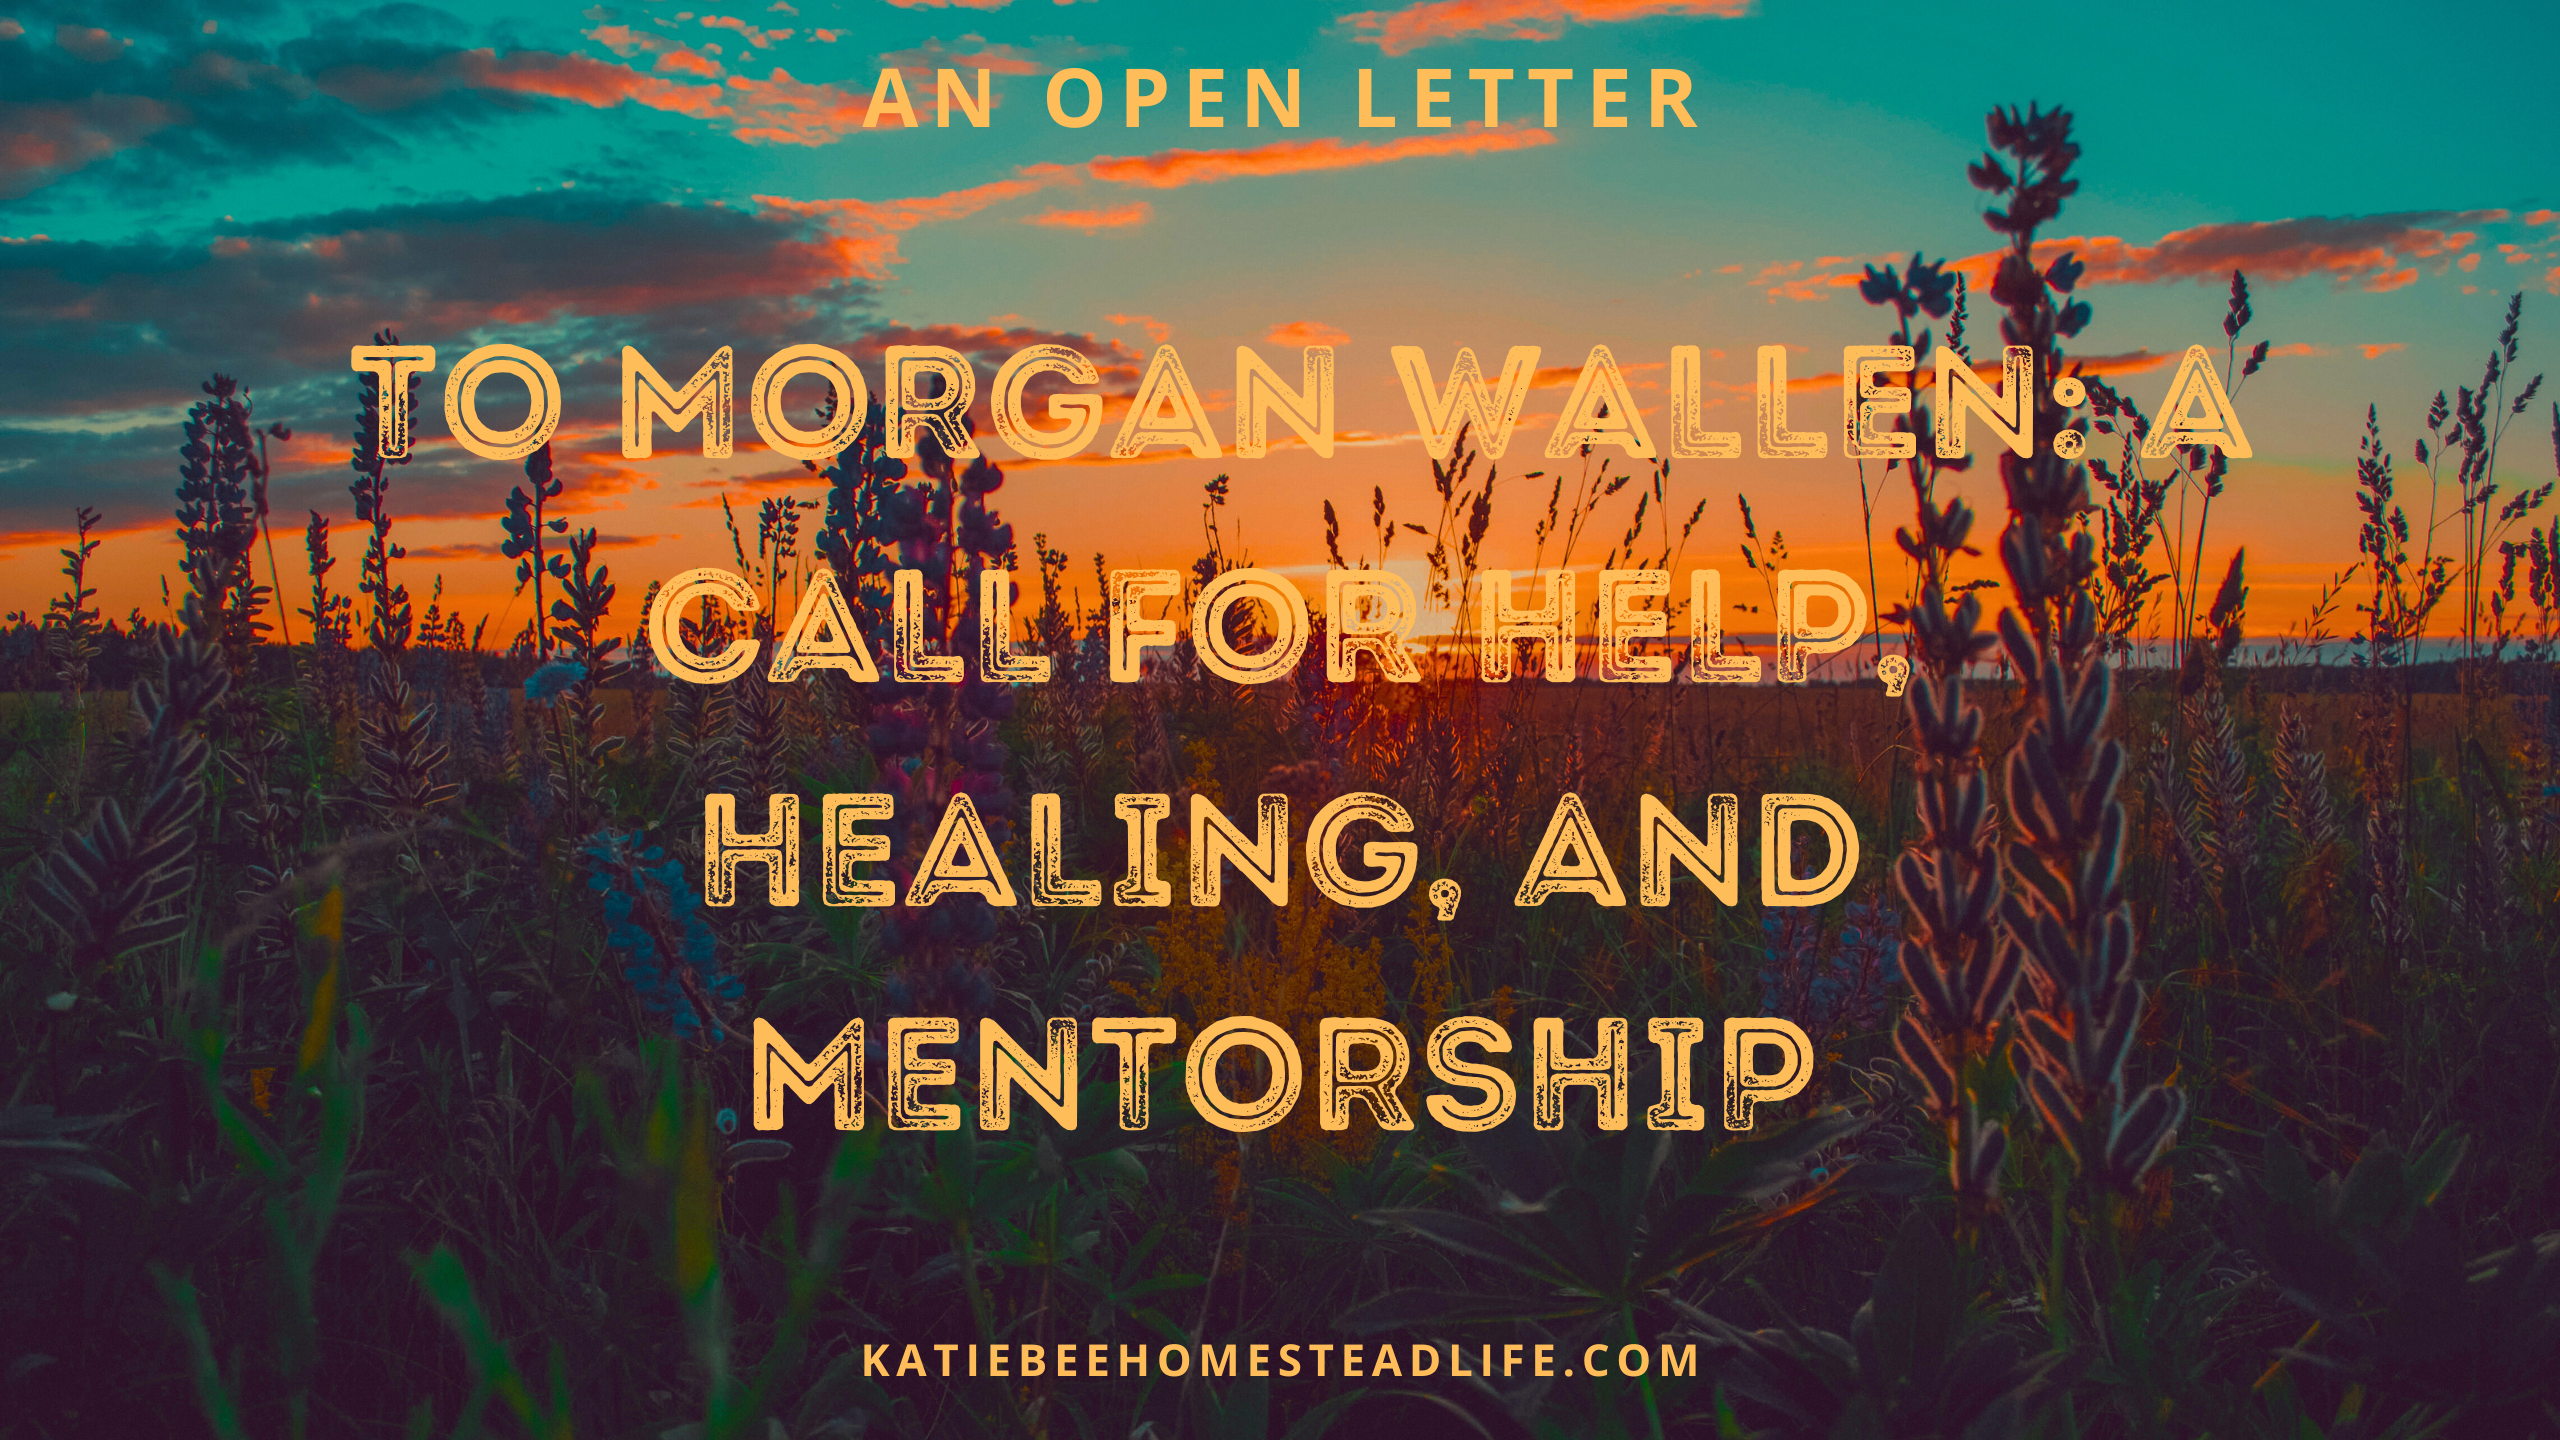 An Open Letter to Morgan Wallen: A Call for Help, Healing, and Mentorship